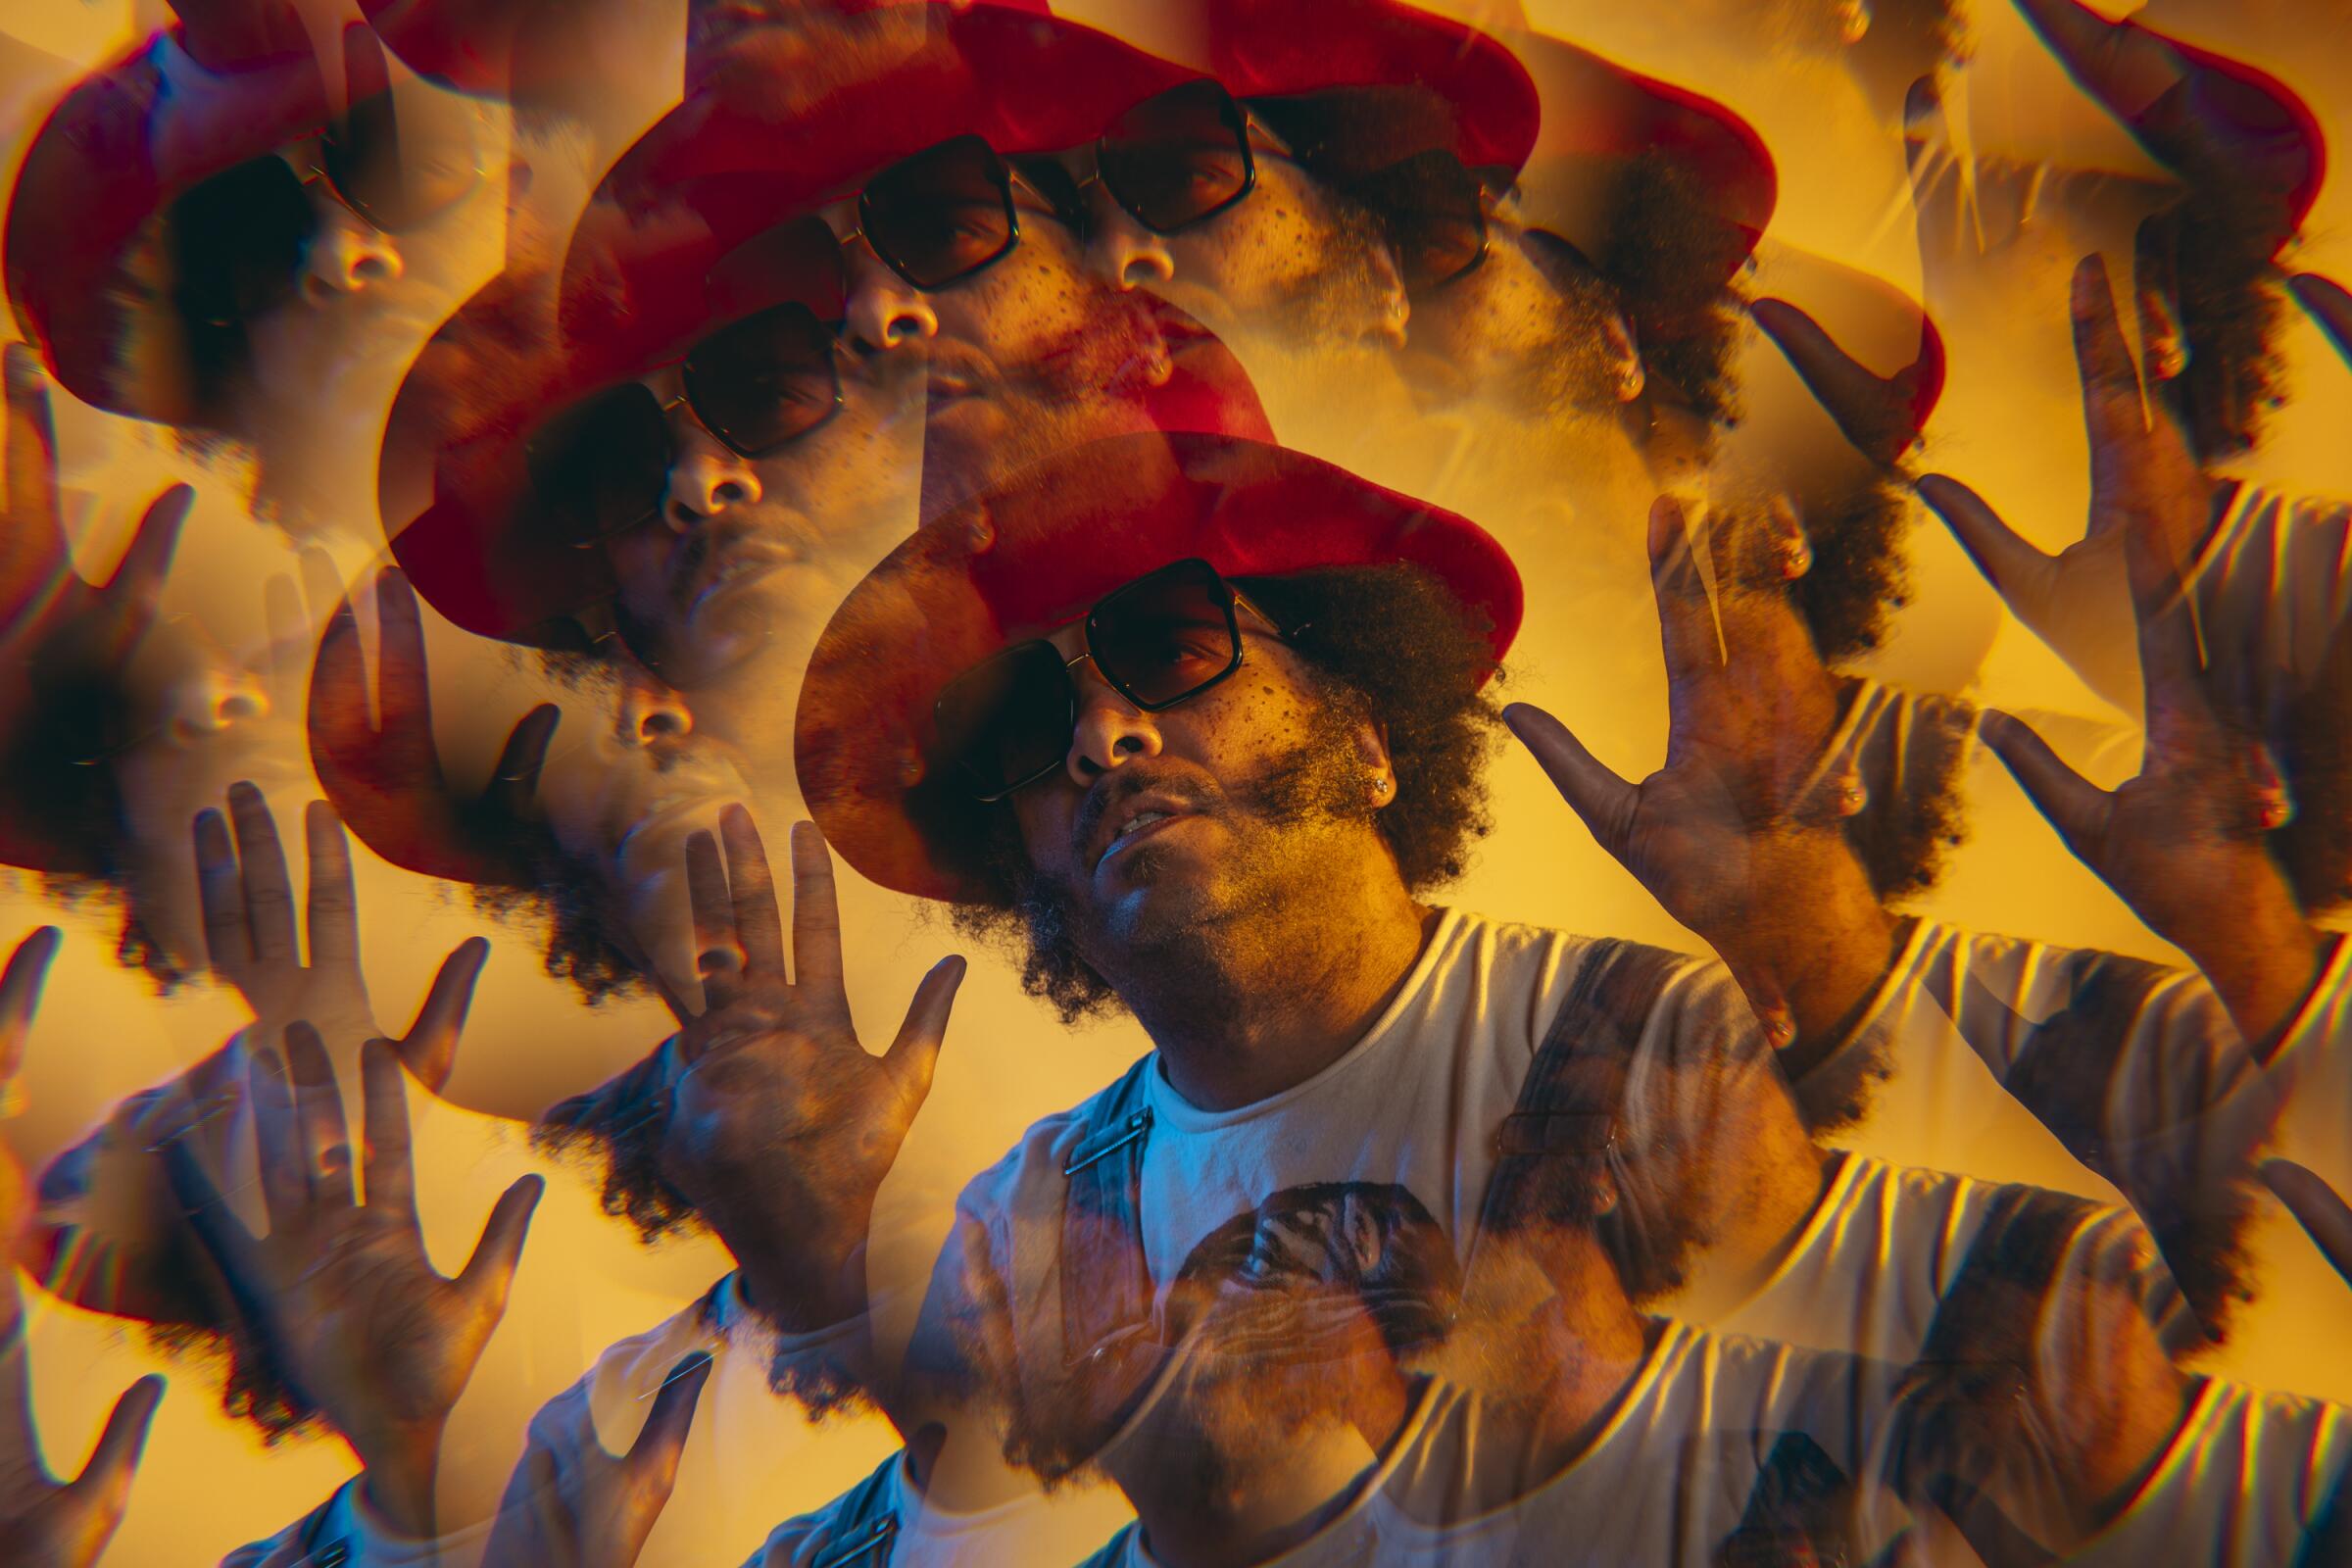 Boots Riley wears a large hat amid a swirl of his own image in a multiple-exposure portrait.